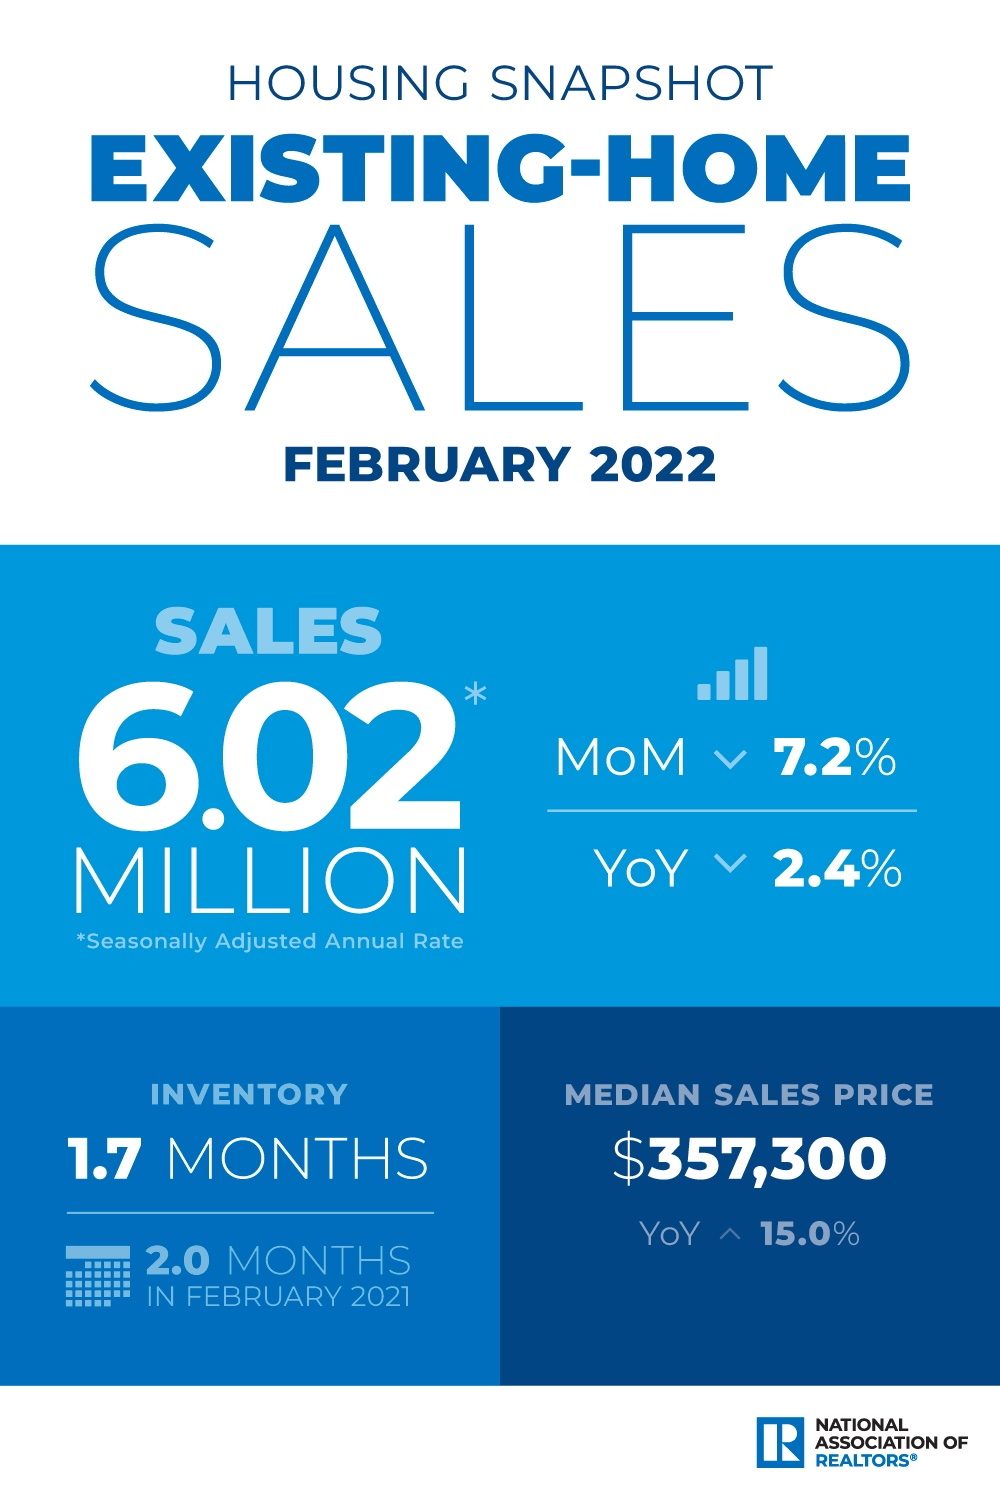 An infographic showing statistics for February existing-home sales.